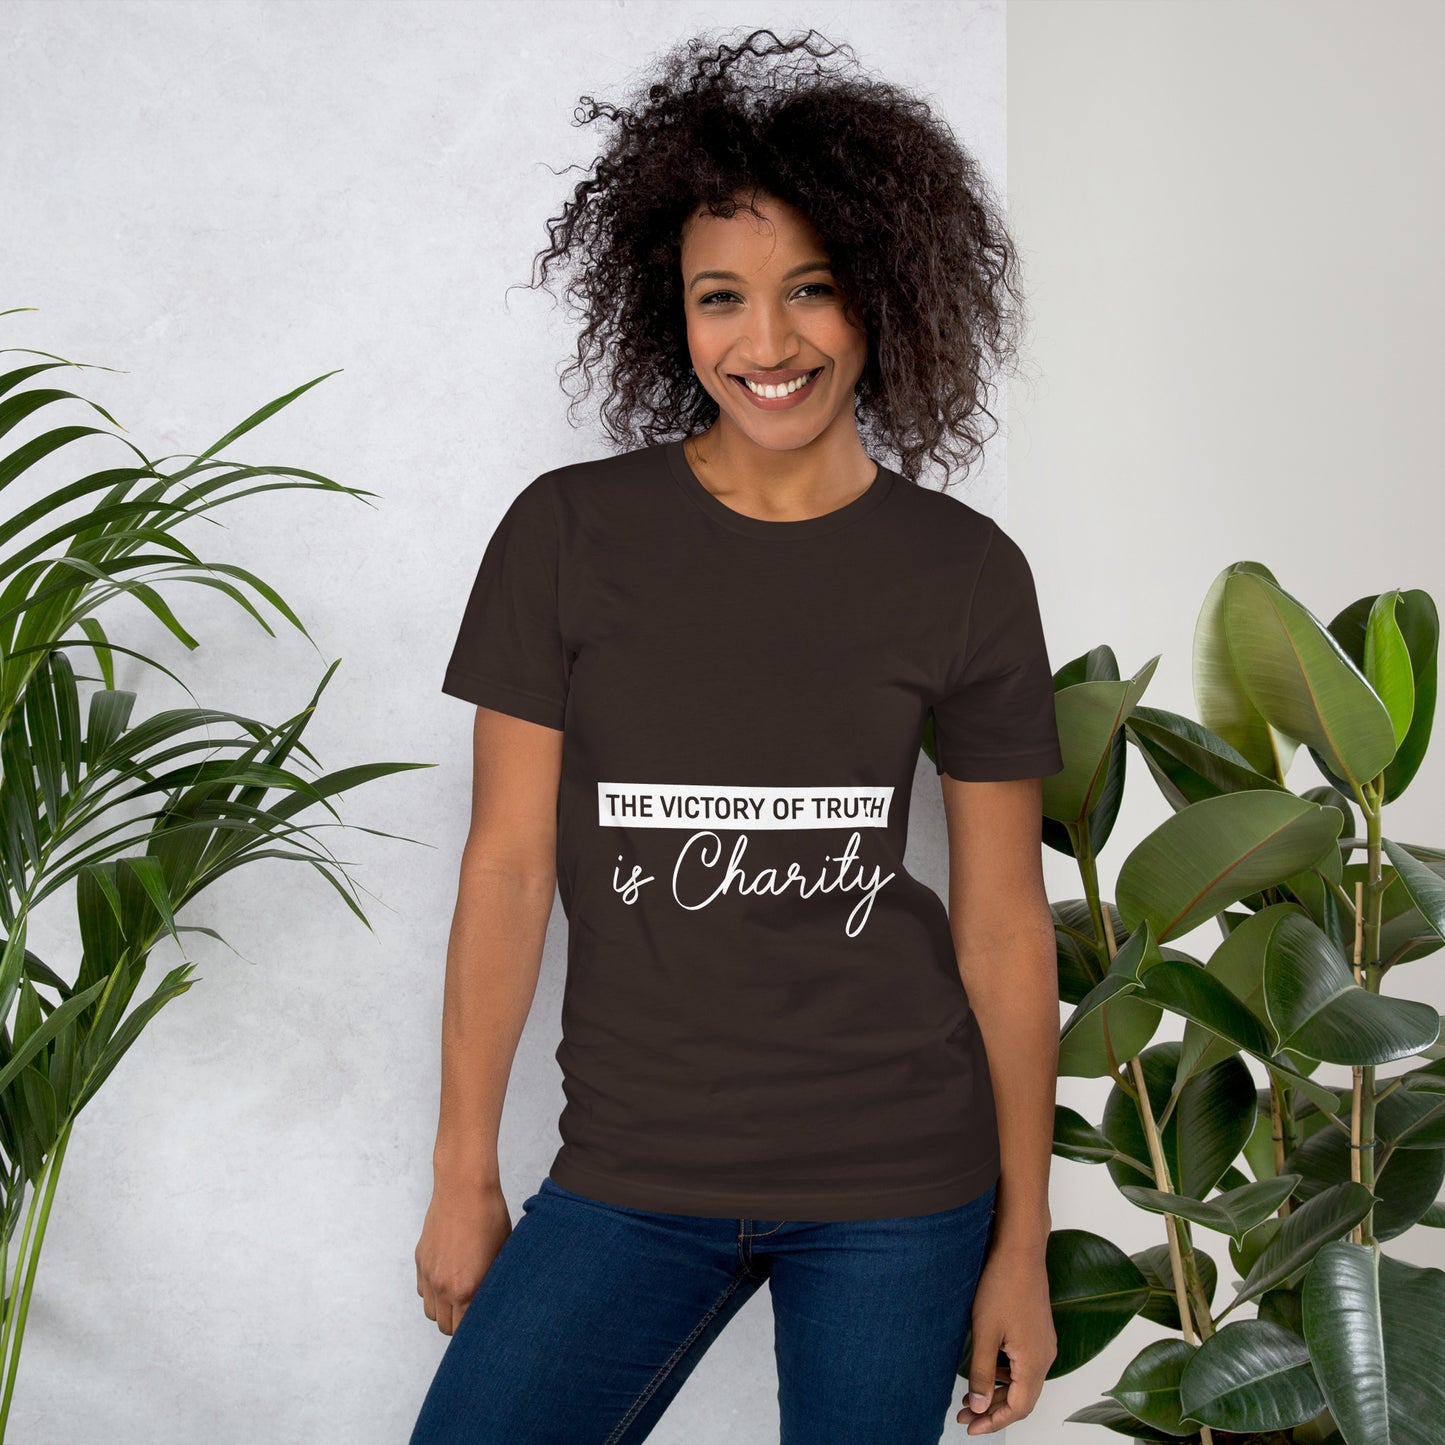 The Victory of Truth is Charity Women's Christian t-Shirt